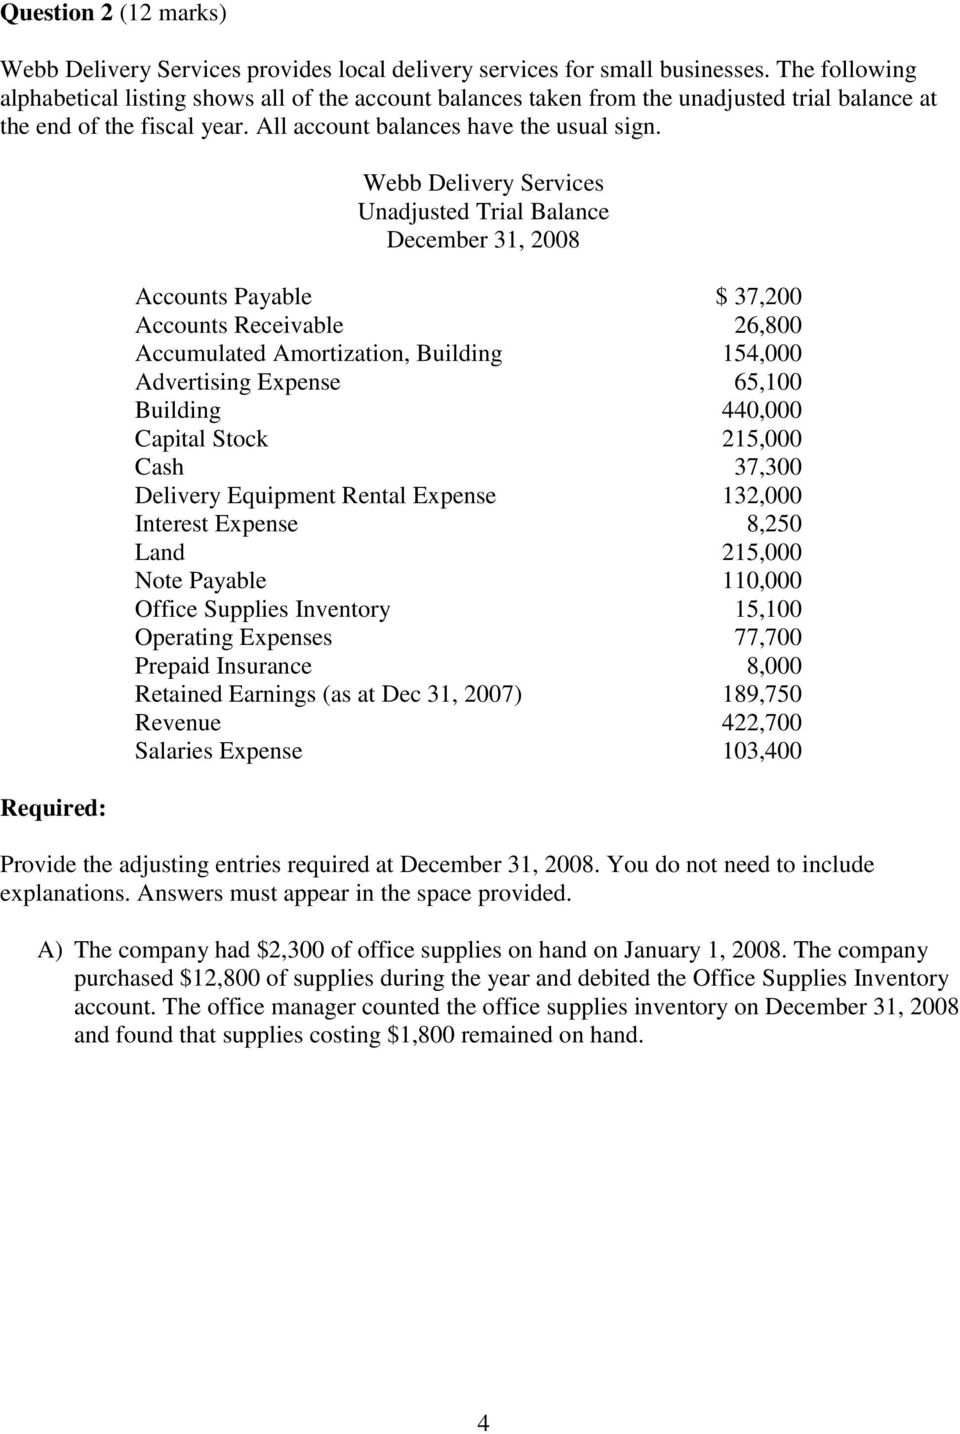 Required: Webb Delivery Services Unadjusted Trial Balance December 31, 2008 Accounts Payable $ 37,200 Accounts Receivable 26,800 Accumulated Amortization, Building 154,000 Advertising Expense 65,100